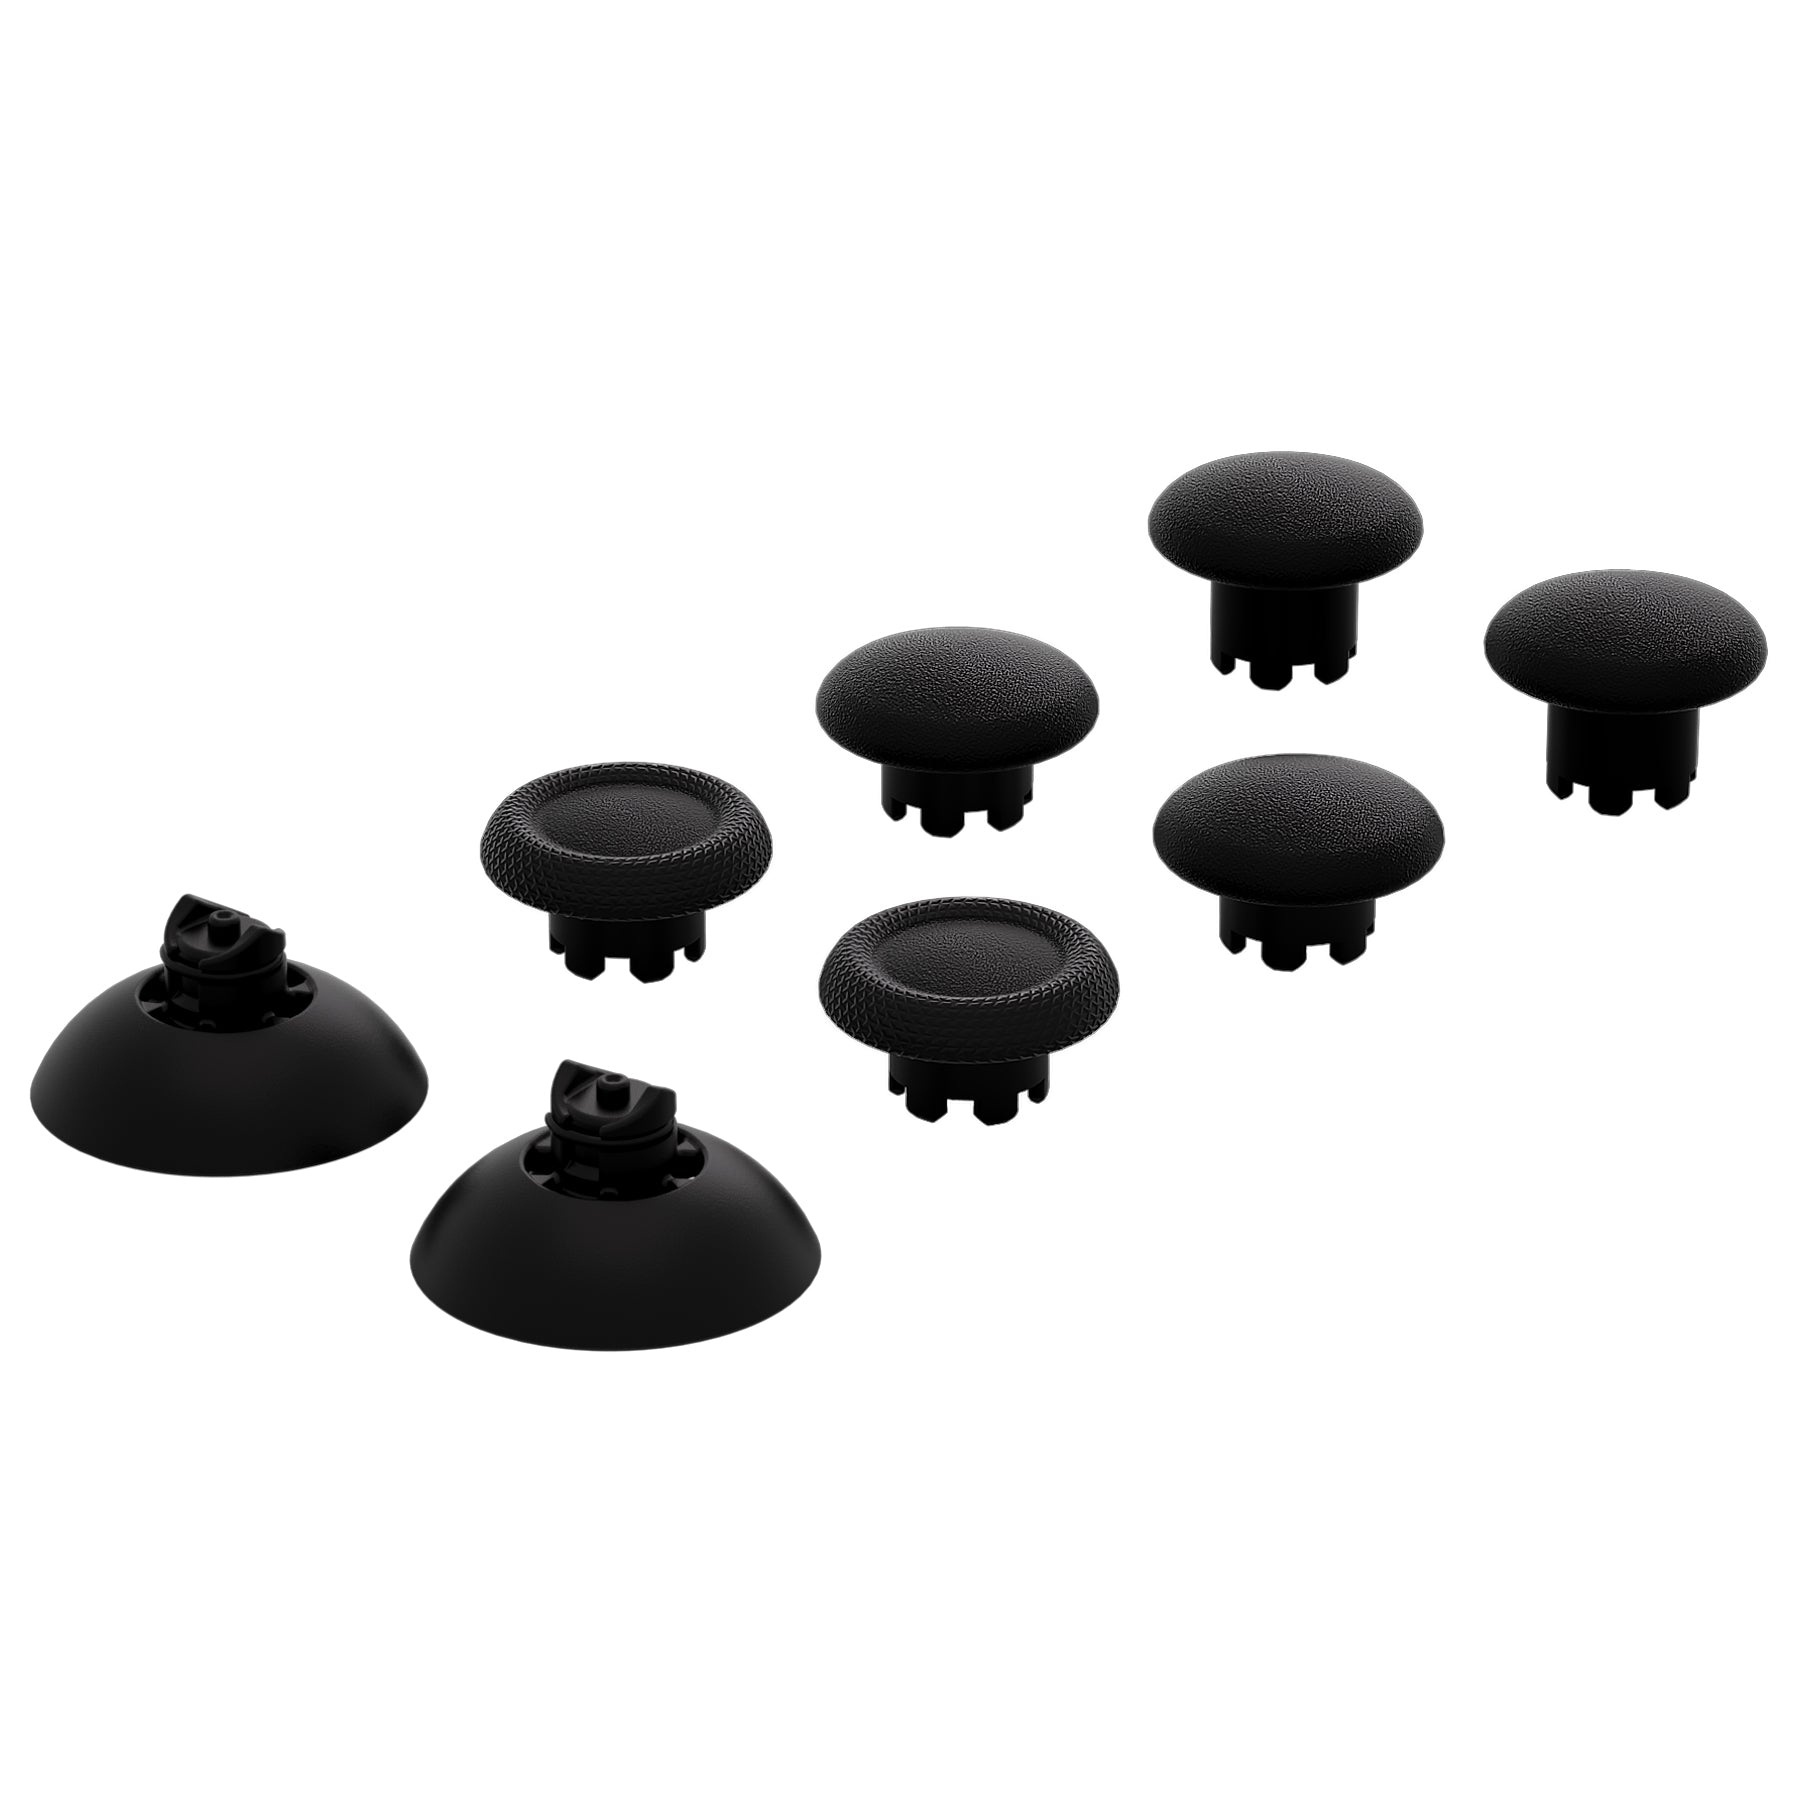 EDGE Sticks Replacement Interchangeable Thumbsticks for PS5 & PS4 All Model Controllers - Black eXtremeRate